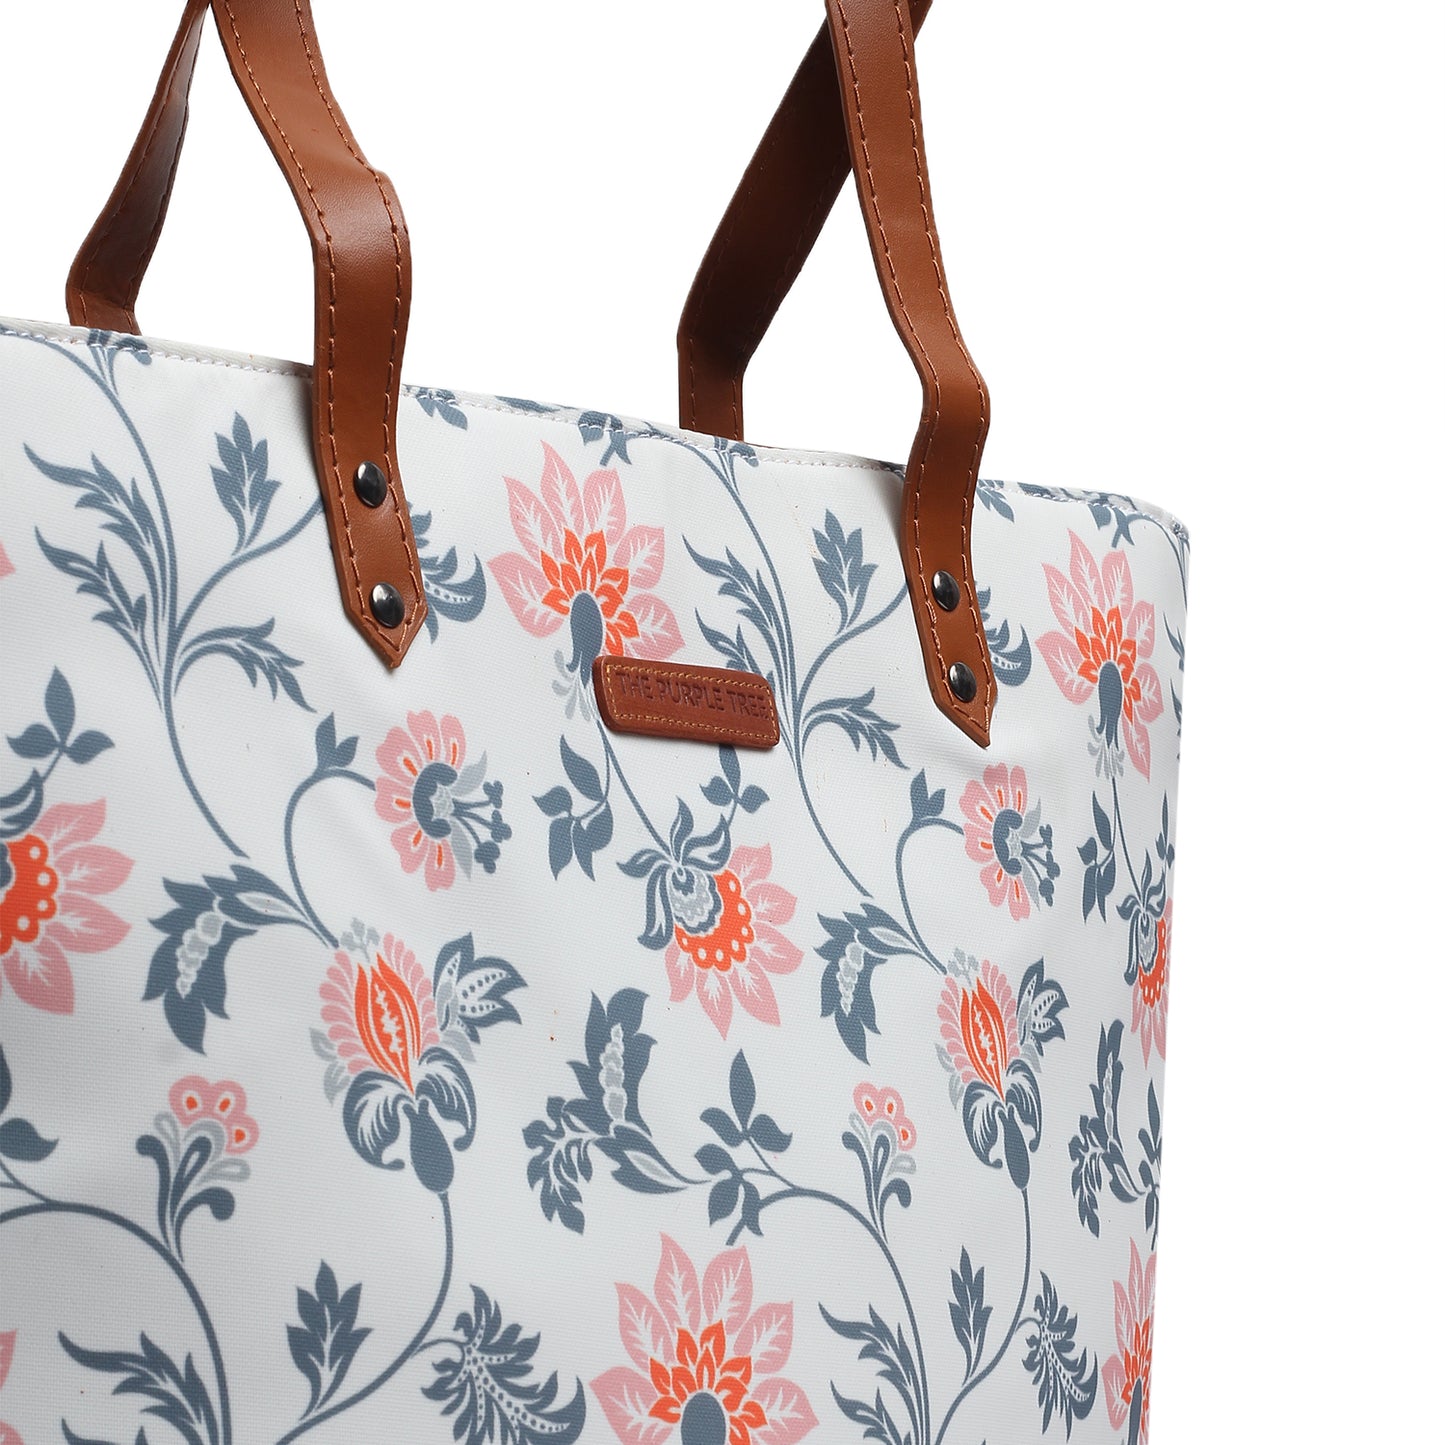 5. Pretty floral tote bag displayed on a chair.